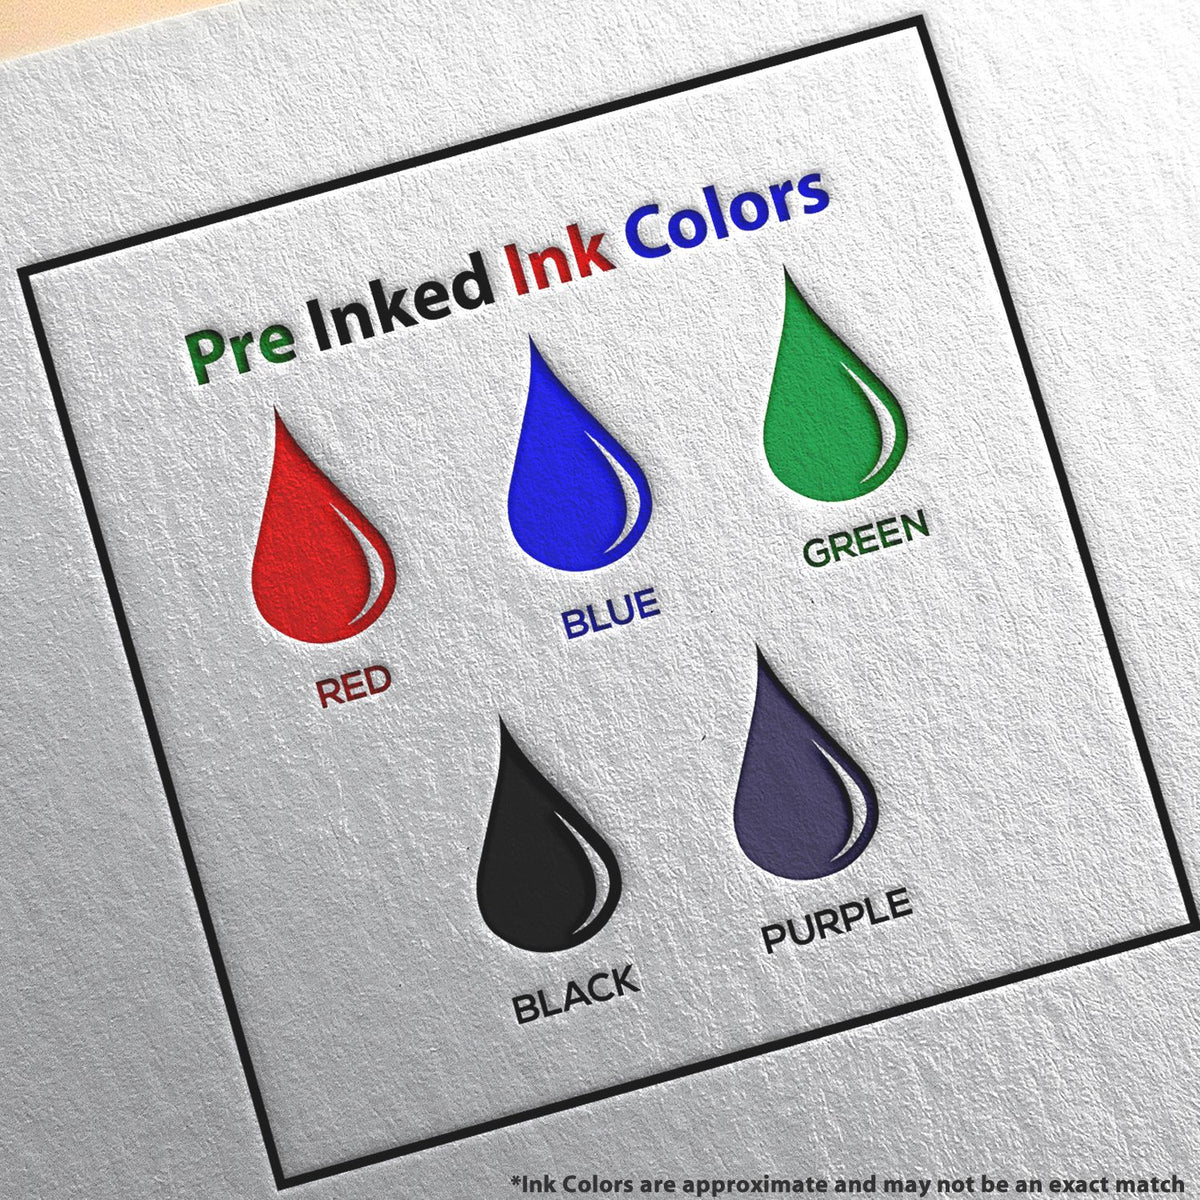 A picture showing the different ink colors or hues available for the Slim Pre-Inked Rectangular Notary Stamp for Georgia product.